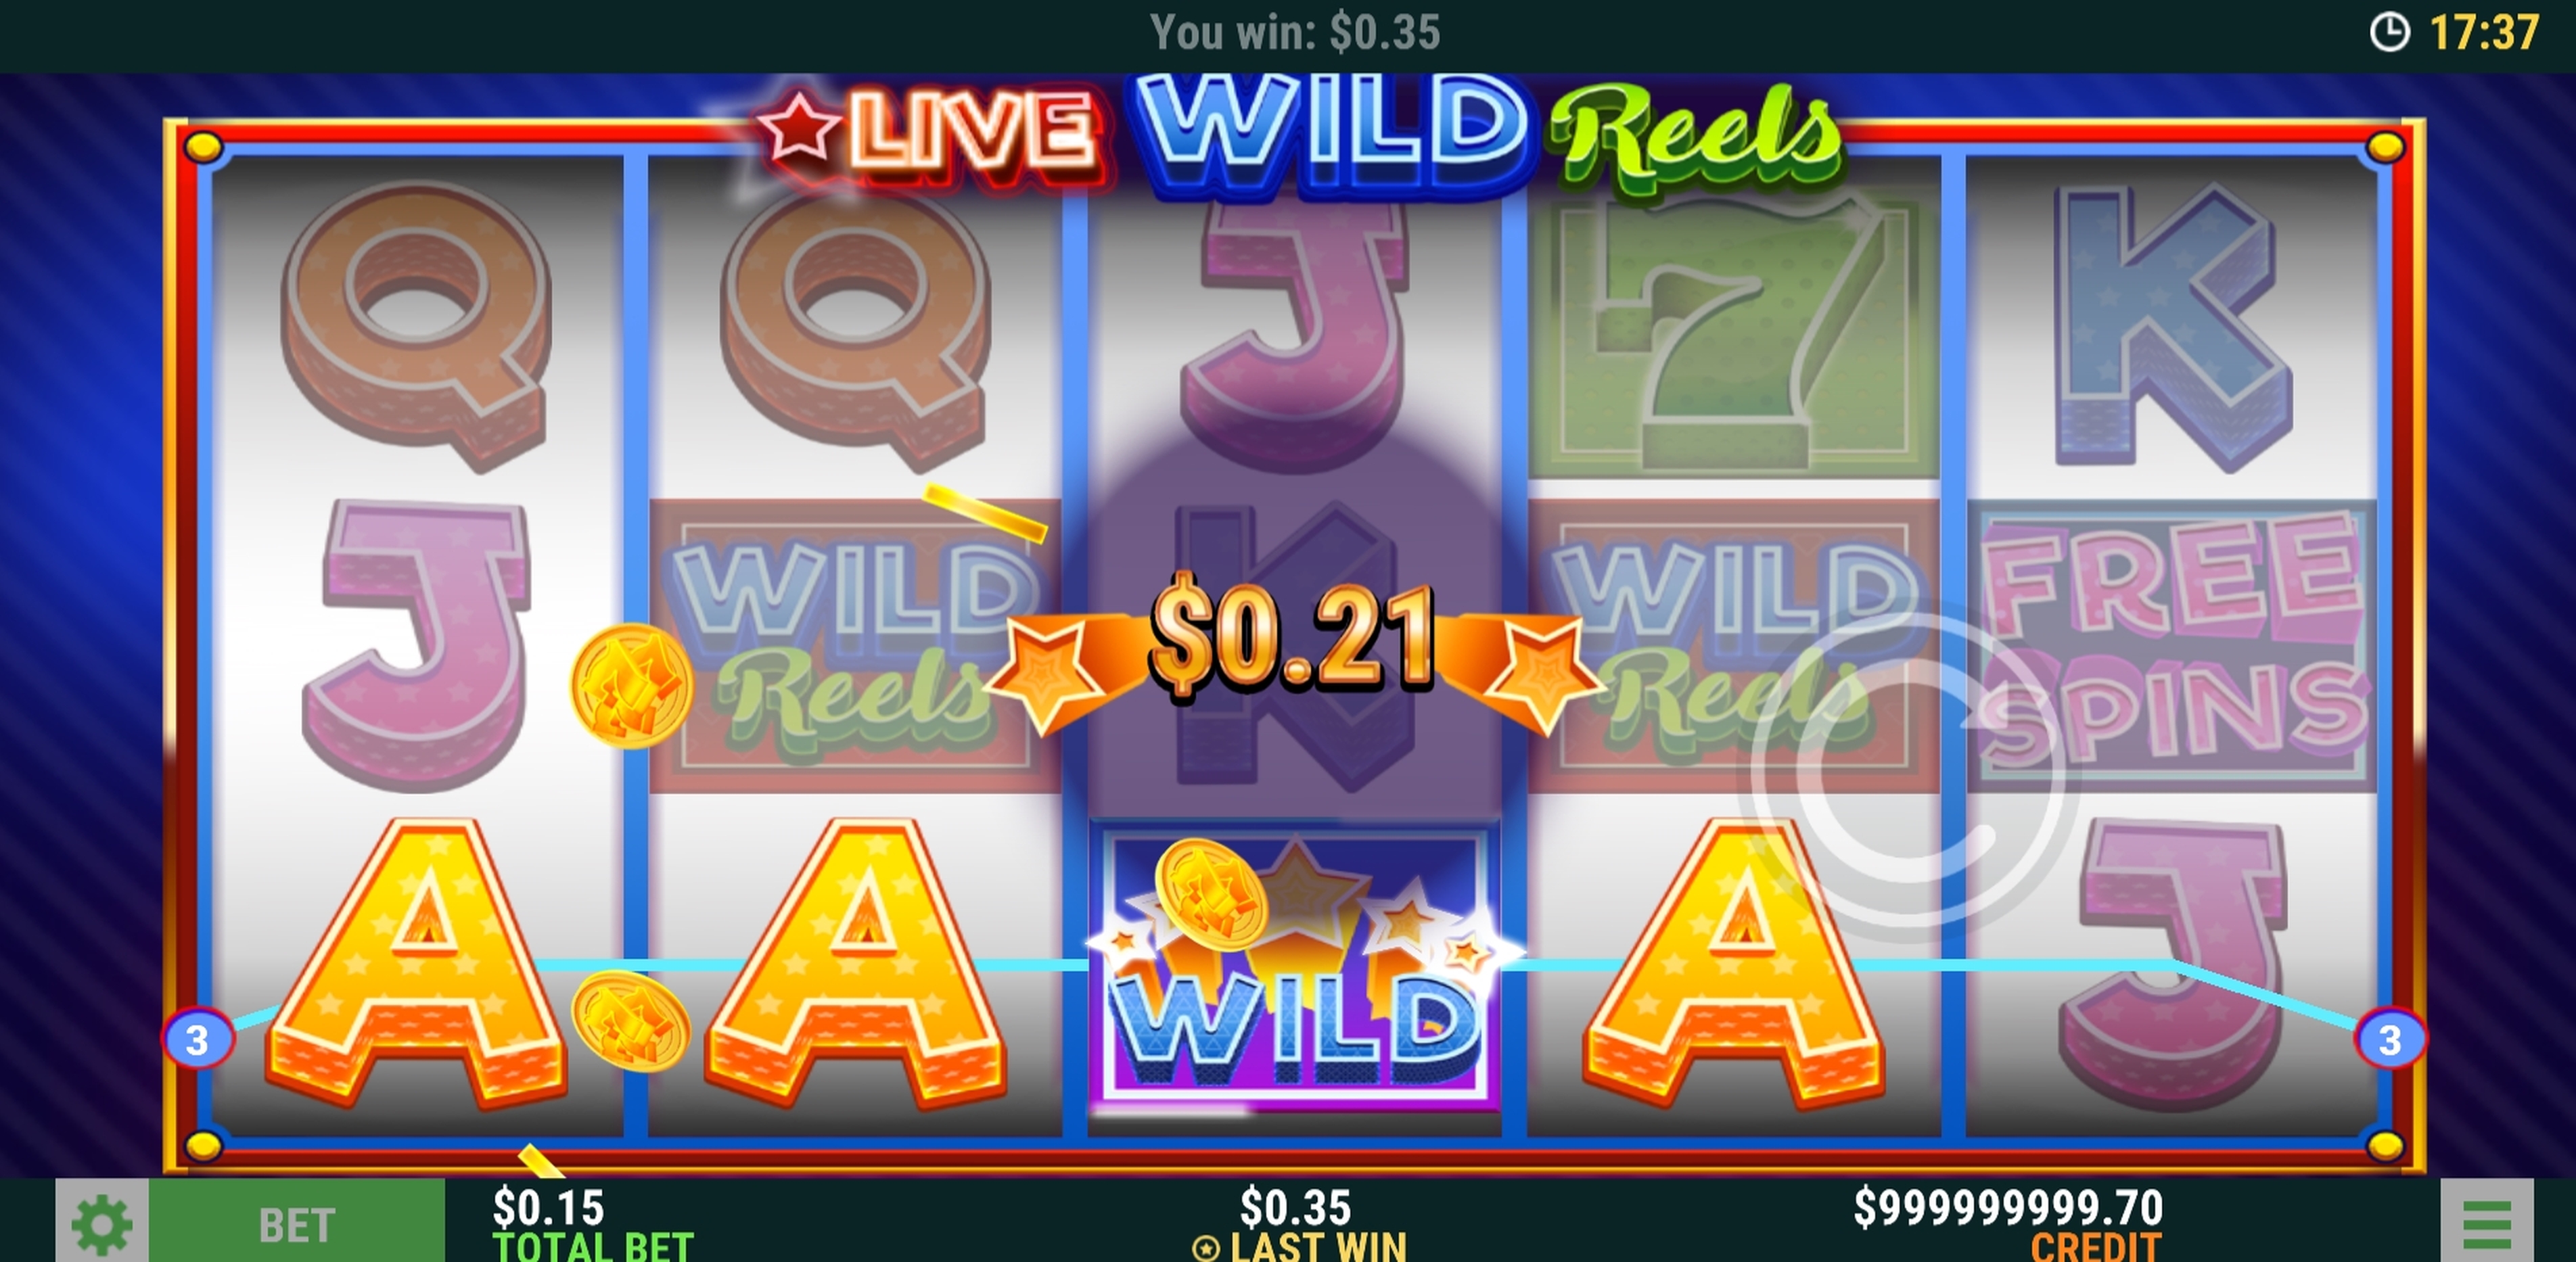 Win Money in Live Wild Reels Free Slot Game by Slot Factory